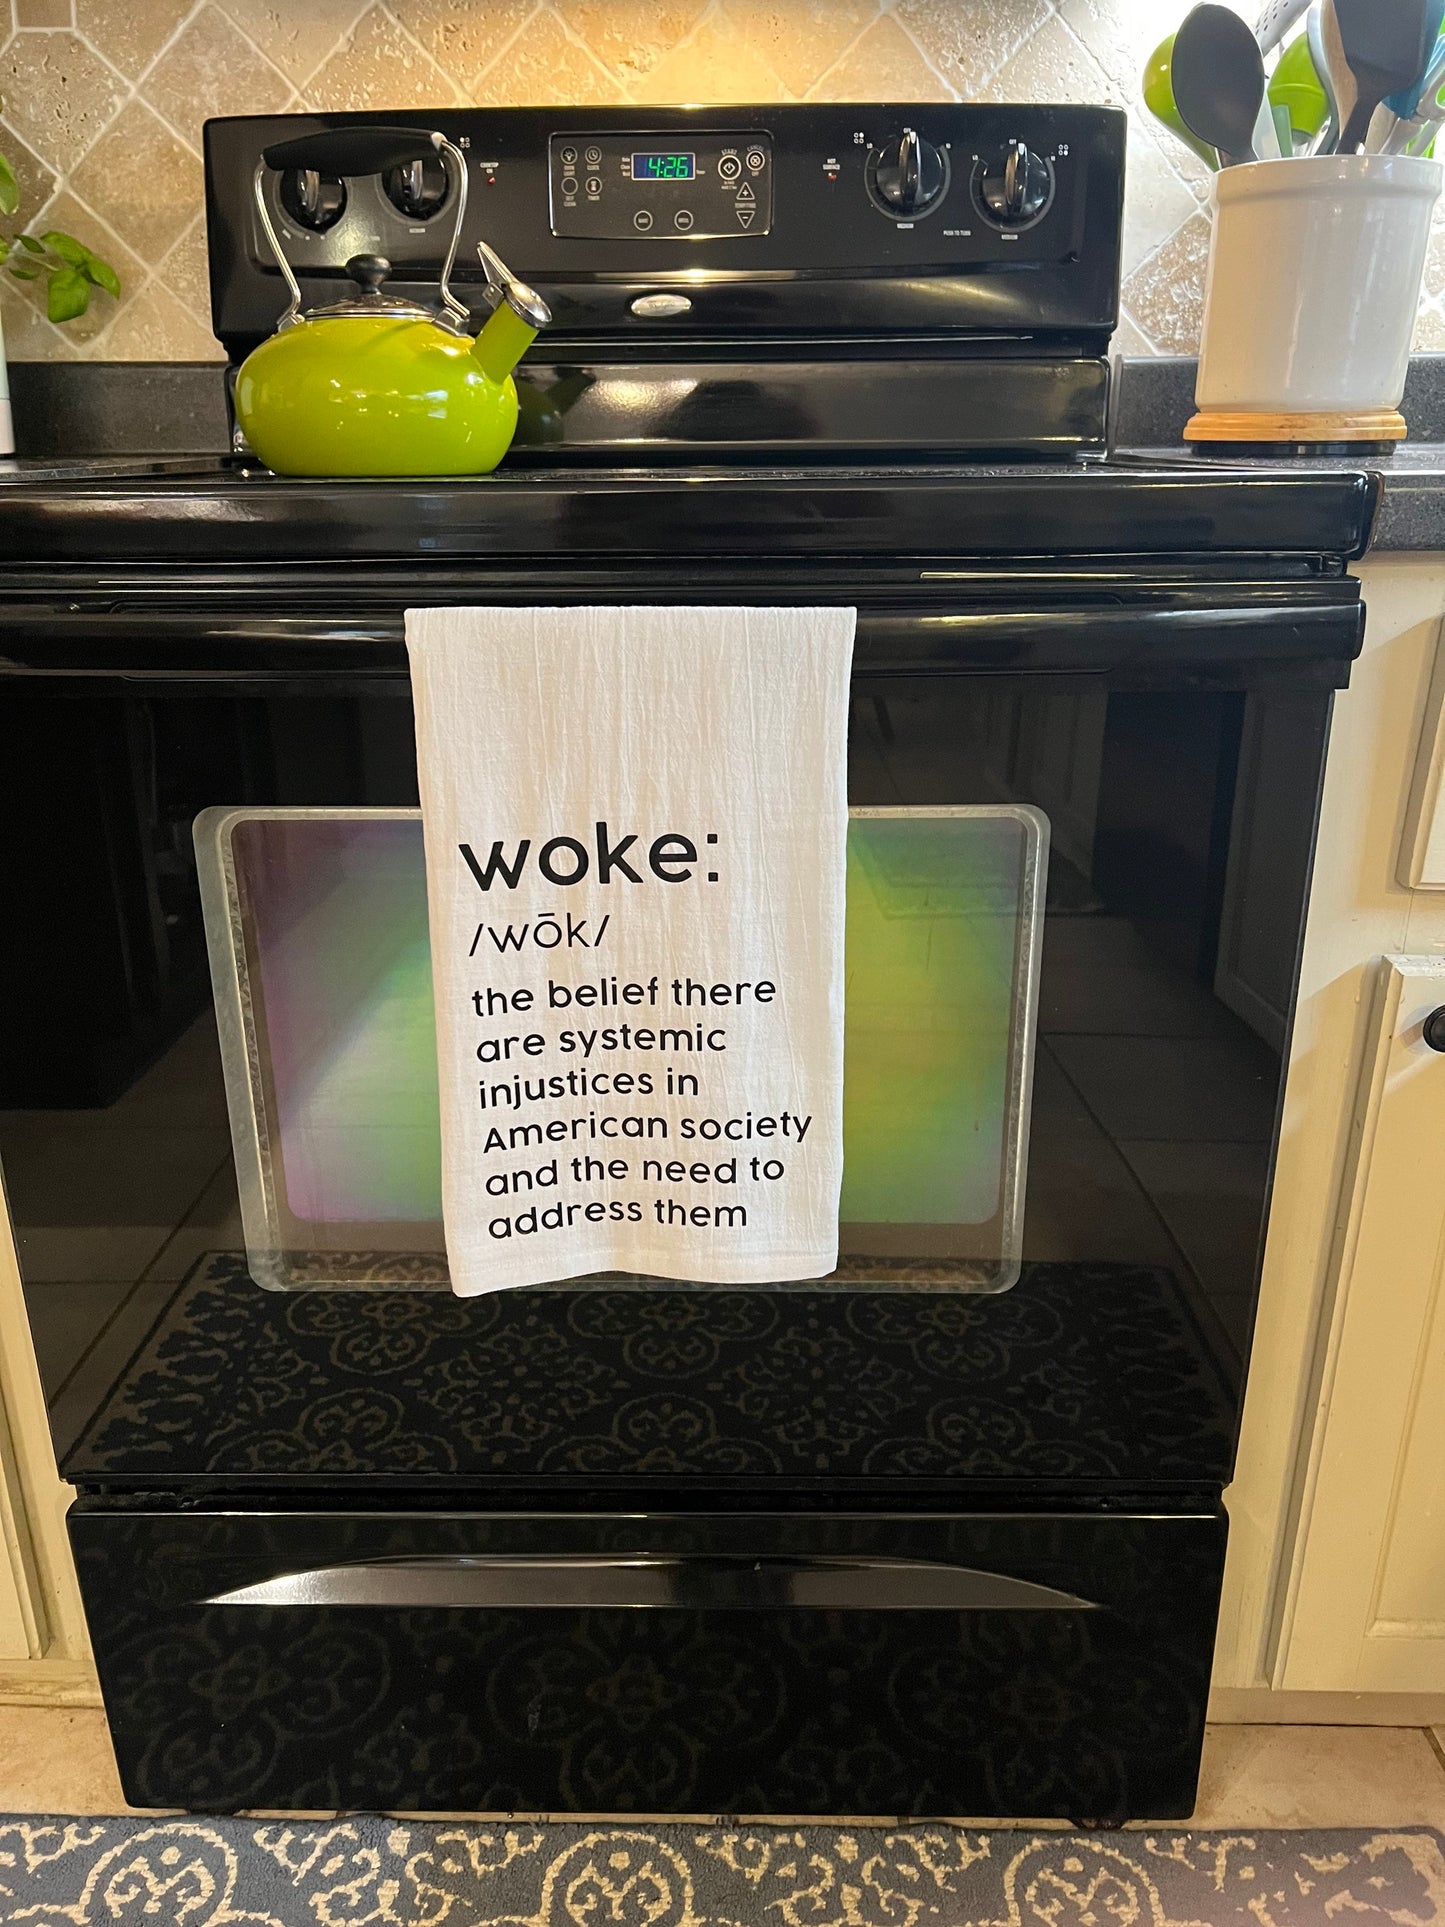 Woke Definition Tea Towel - Systemic Injustices and the Need to Address Them - Ron DeSantis